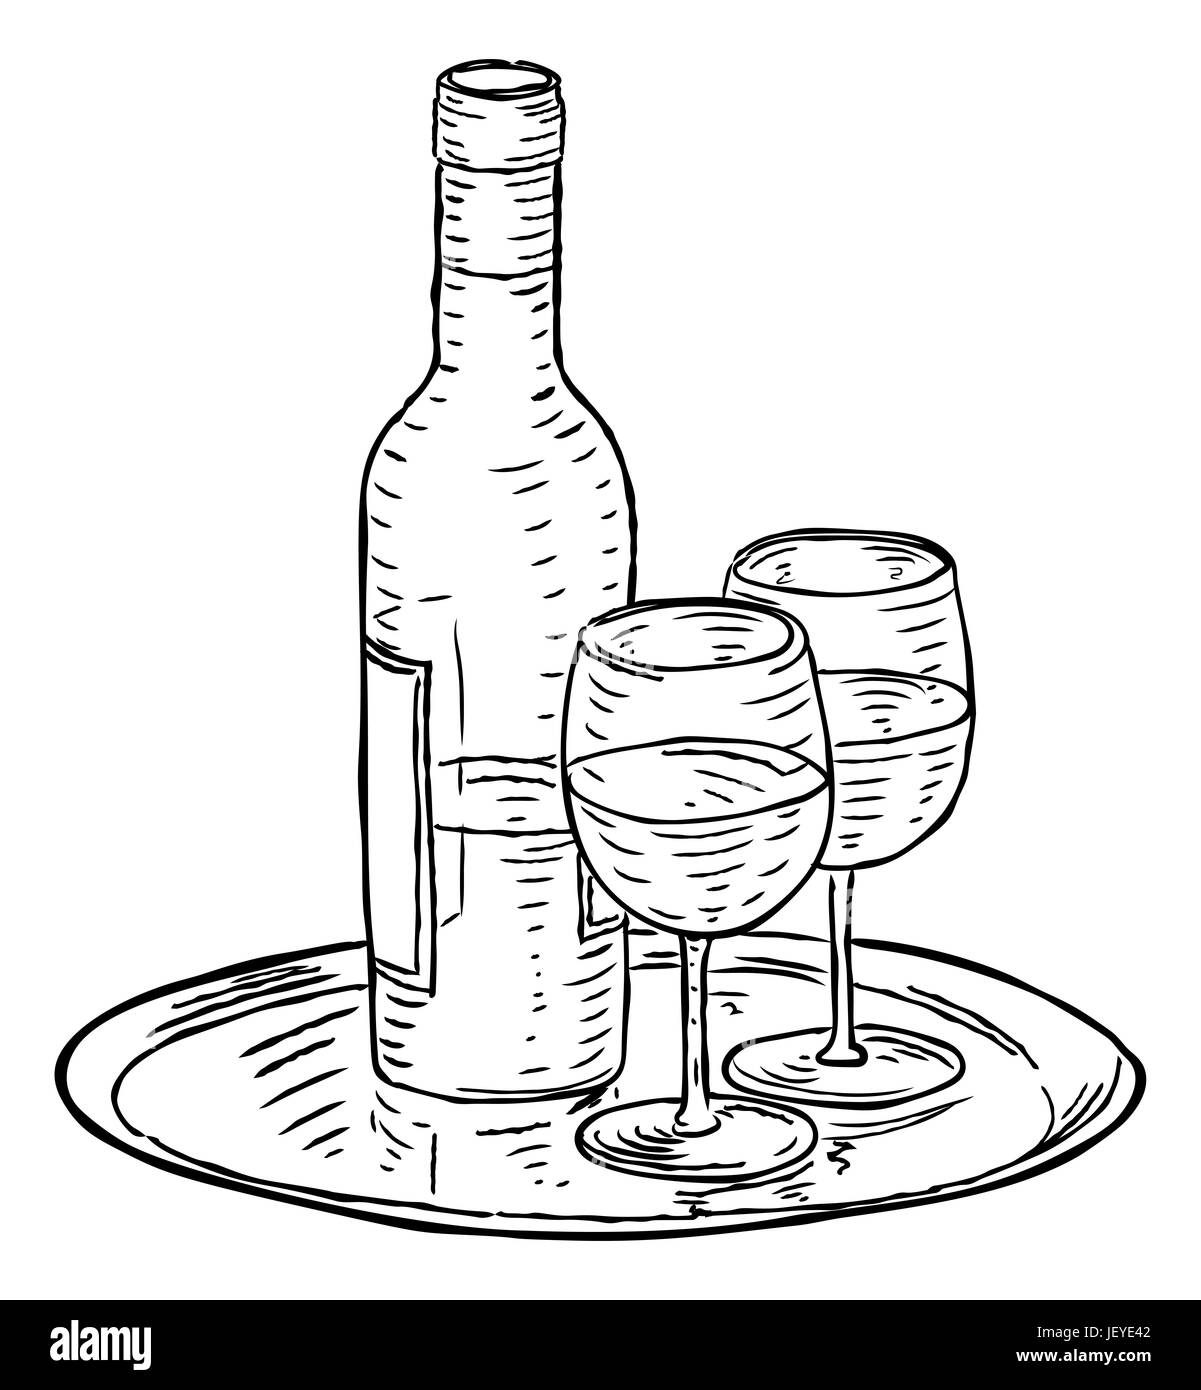 A bottle of wine and two glasses on a tray hand draw in a retro vintage woodcut engraved or etched style. Stock Photo